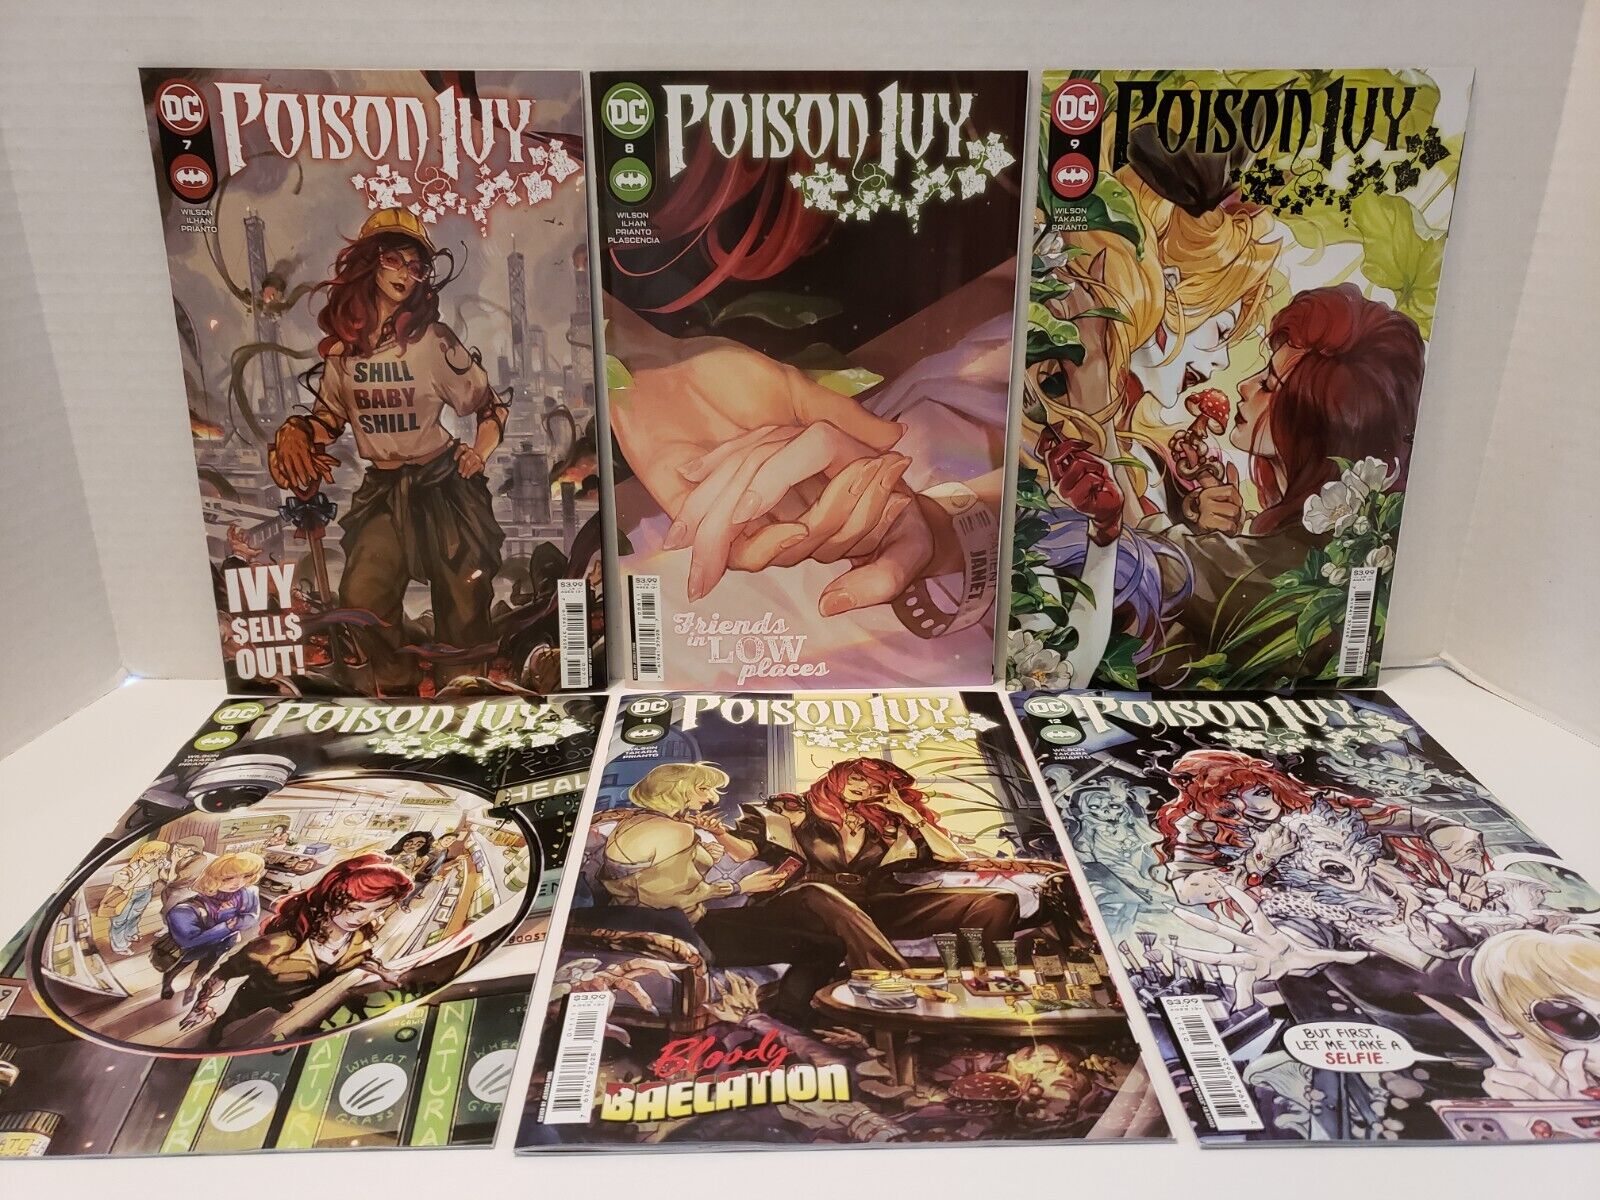 Poison Ivy #7 8 9 10 11 12 (NM/NM+ or 9.4/9.6) - 2nd Story Arc - Sold Out